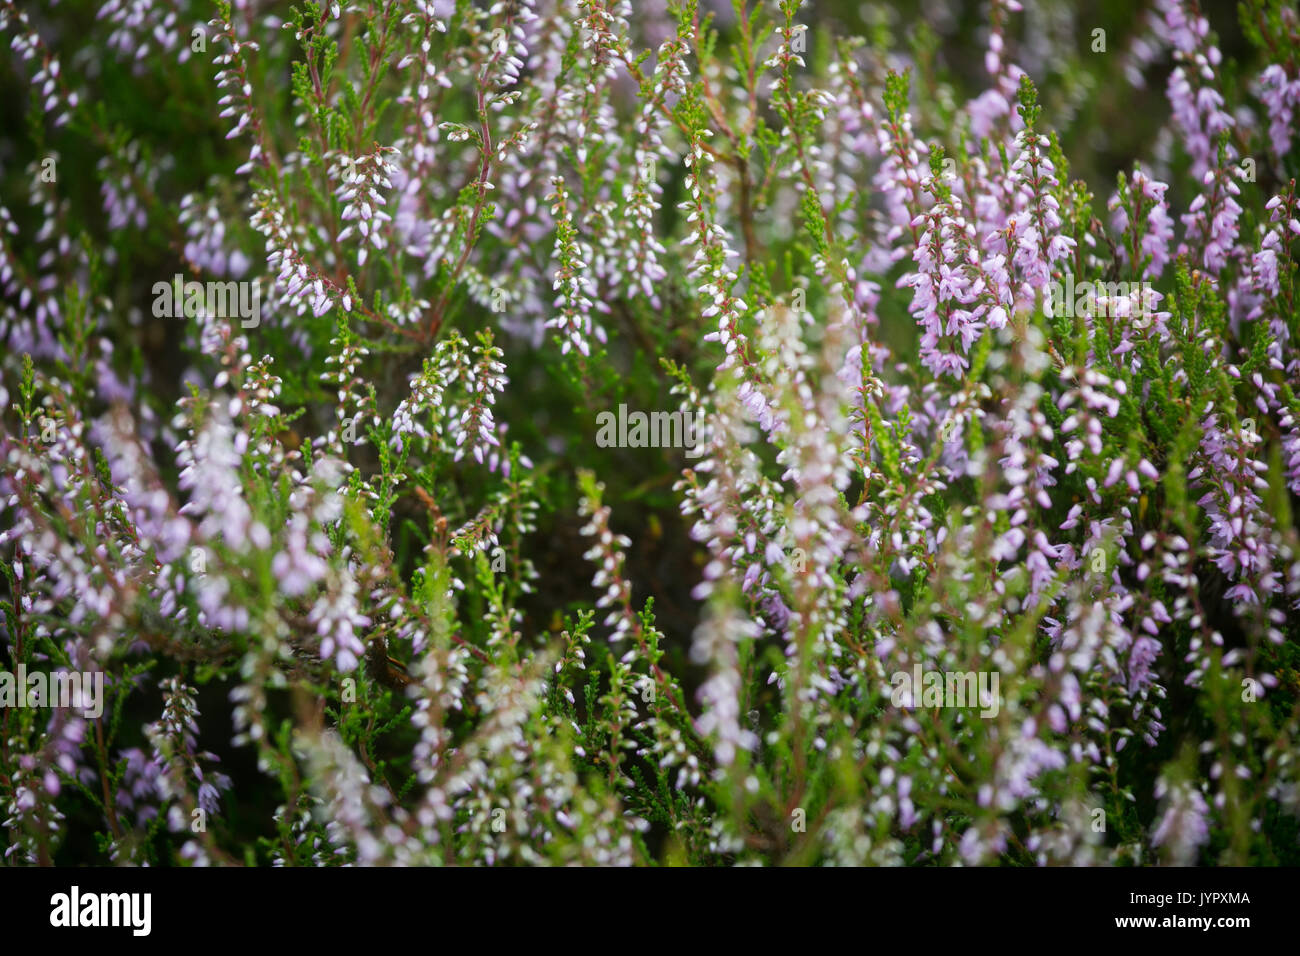 Heather on moorland in the Borders of Scotland. The hills are popular hunting ground for grouse. Stock Photo